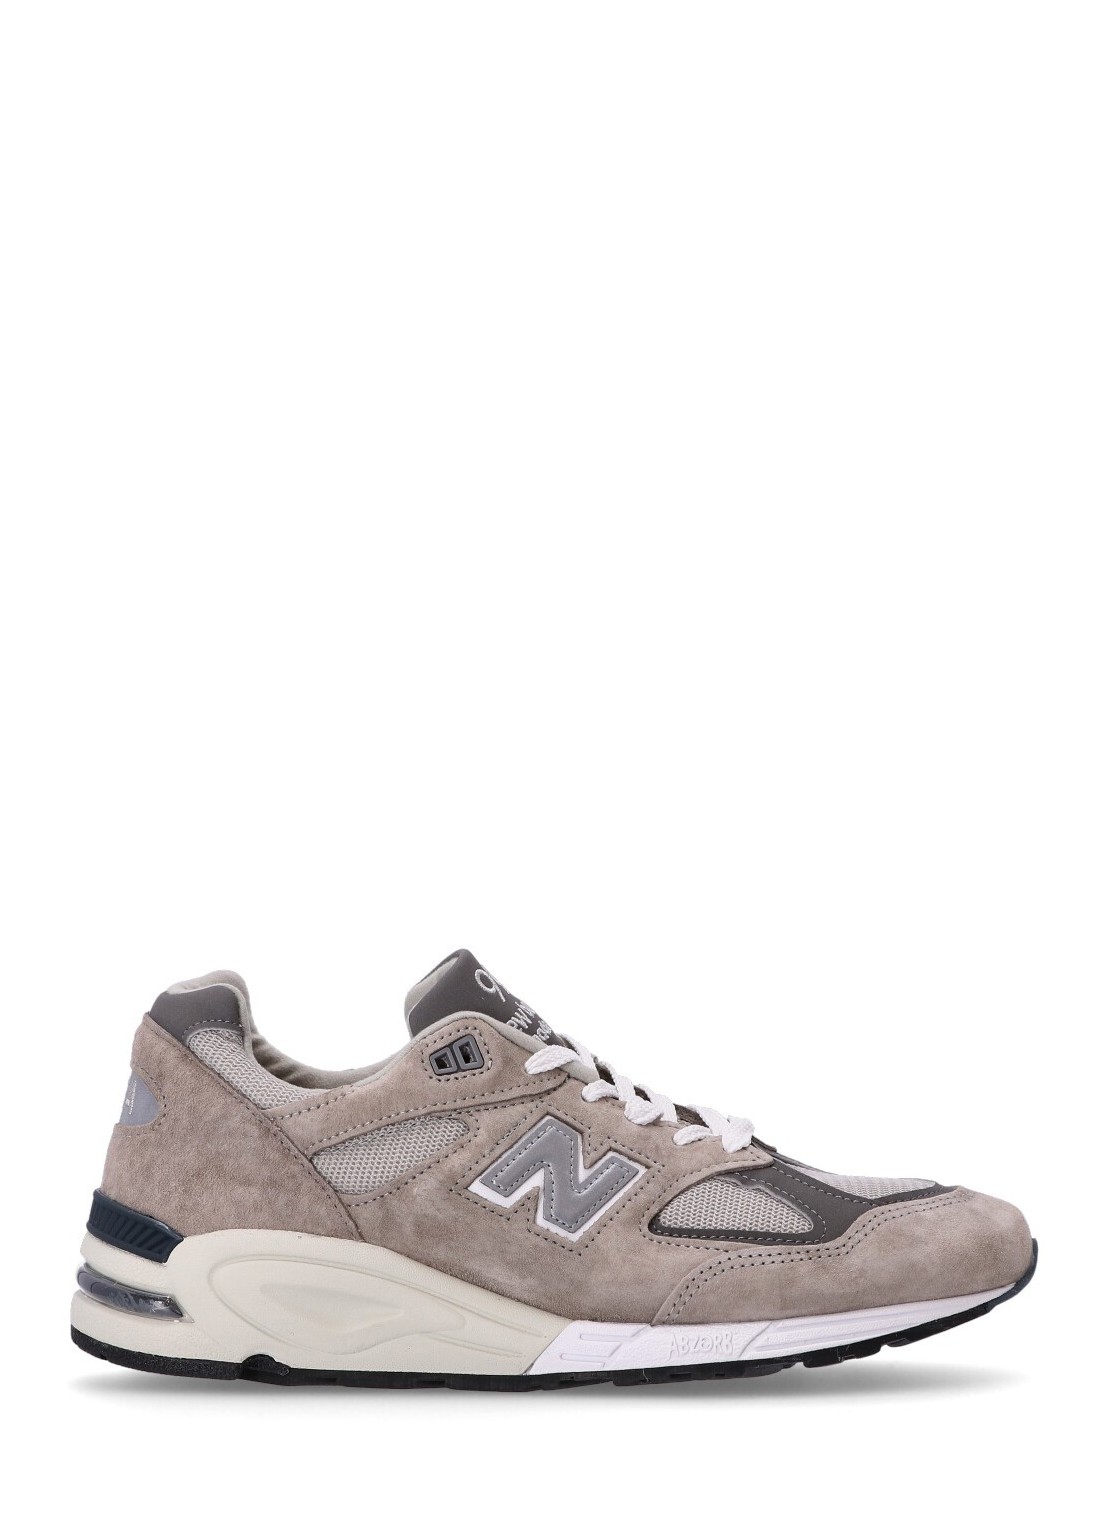 Sneaker new balance sneaker man m990gy2 m990gy2 gy2 talla gris
 